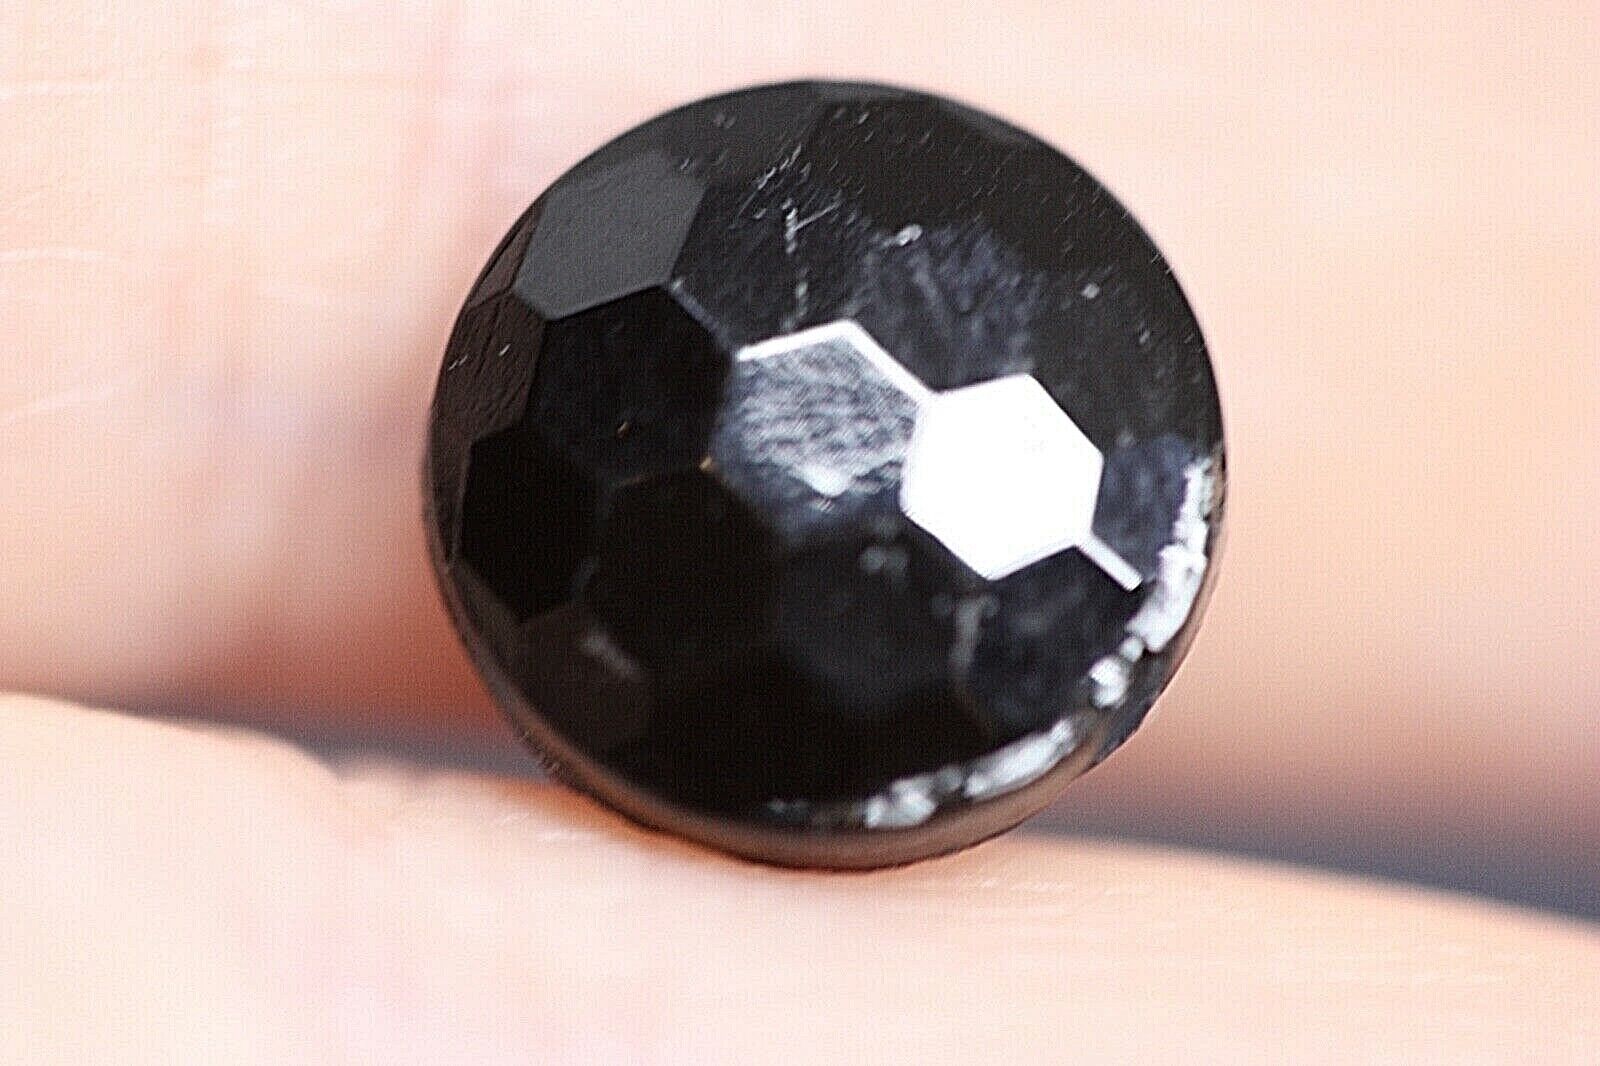 8 Vintage Le Chic Black Glass Honeycomb Buttons Round Faceted Jet Mourning Без бренда - фотография #3